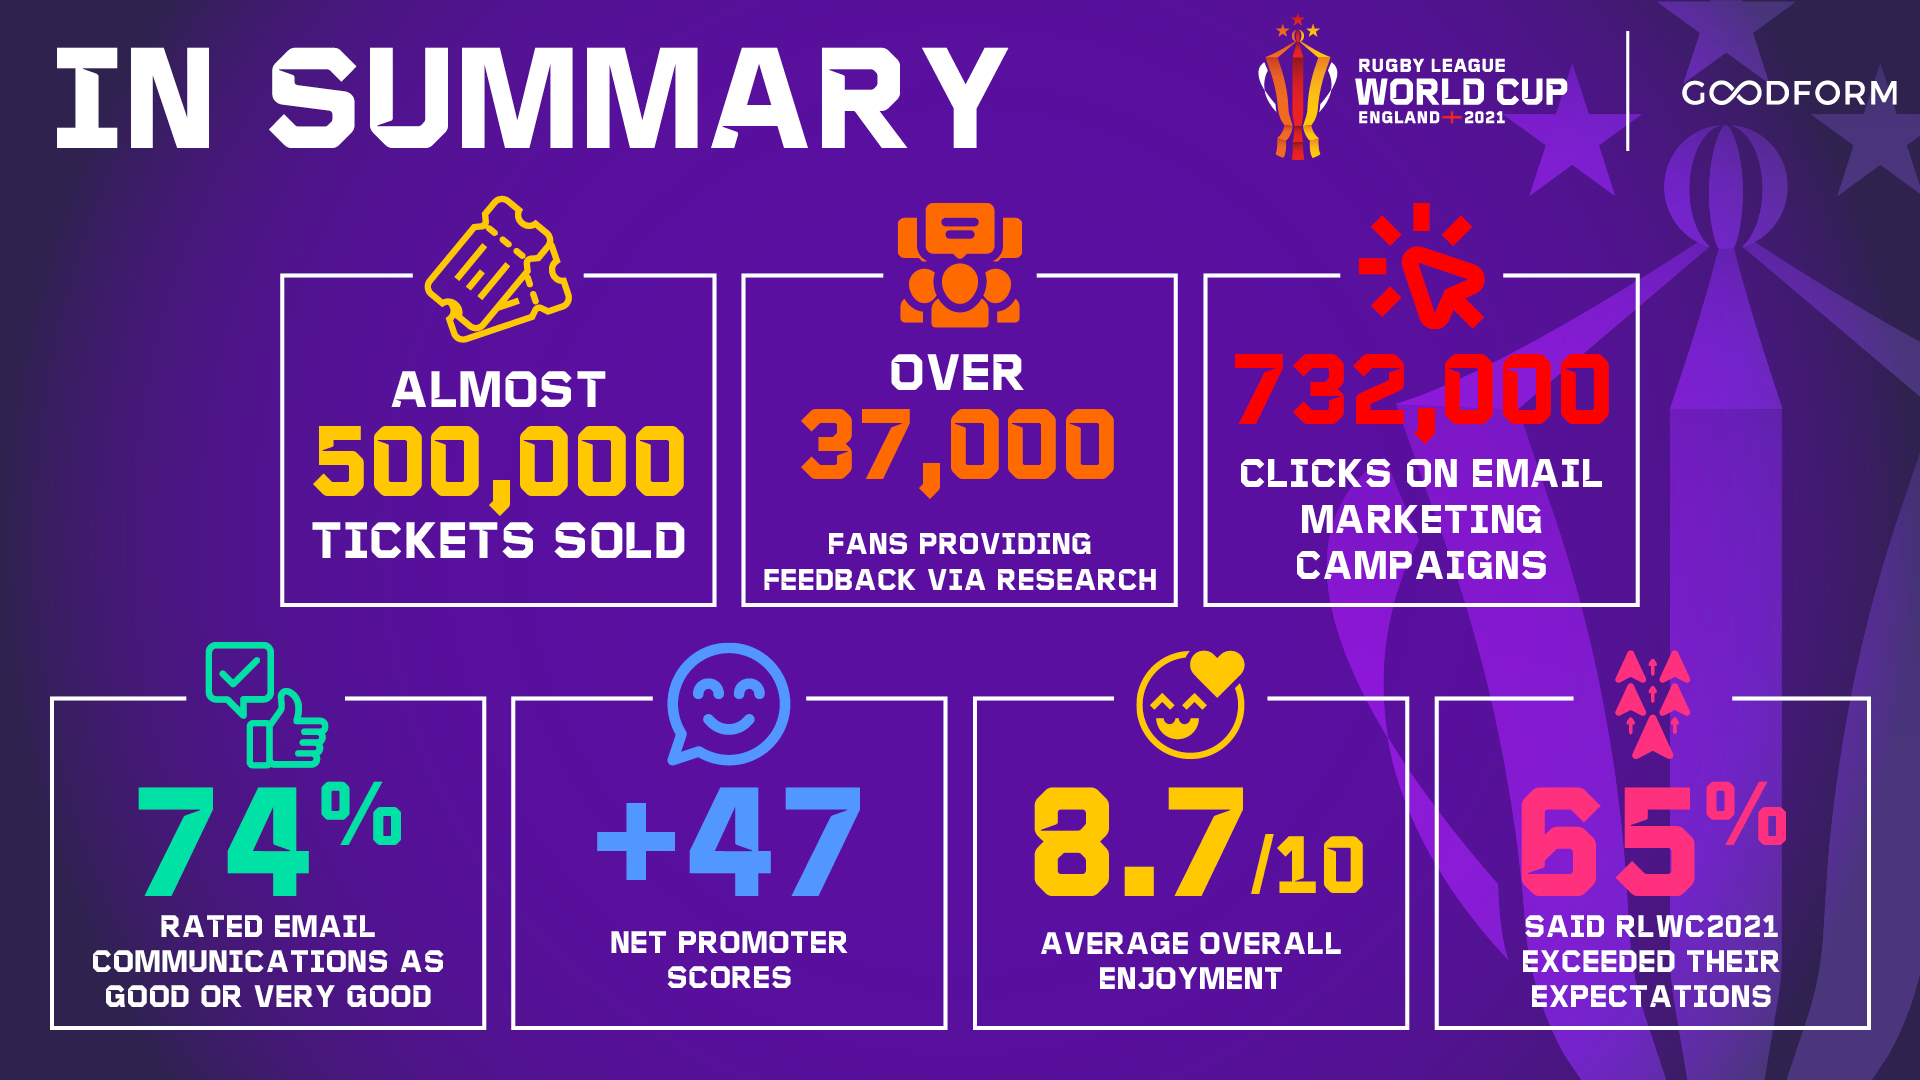 Goodform data and research helps Rugby League World Cup 2021 exceed expectations and set new tournament ticket sales records